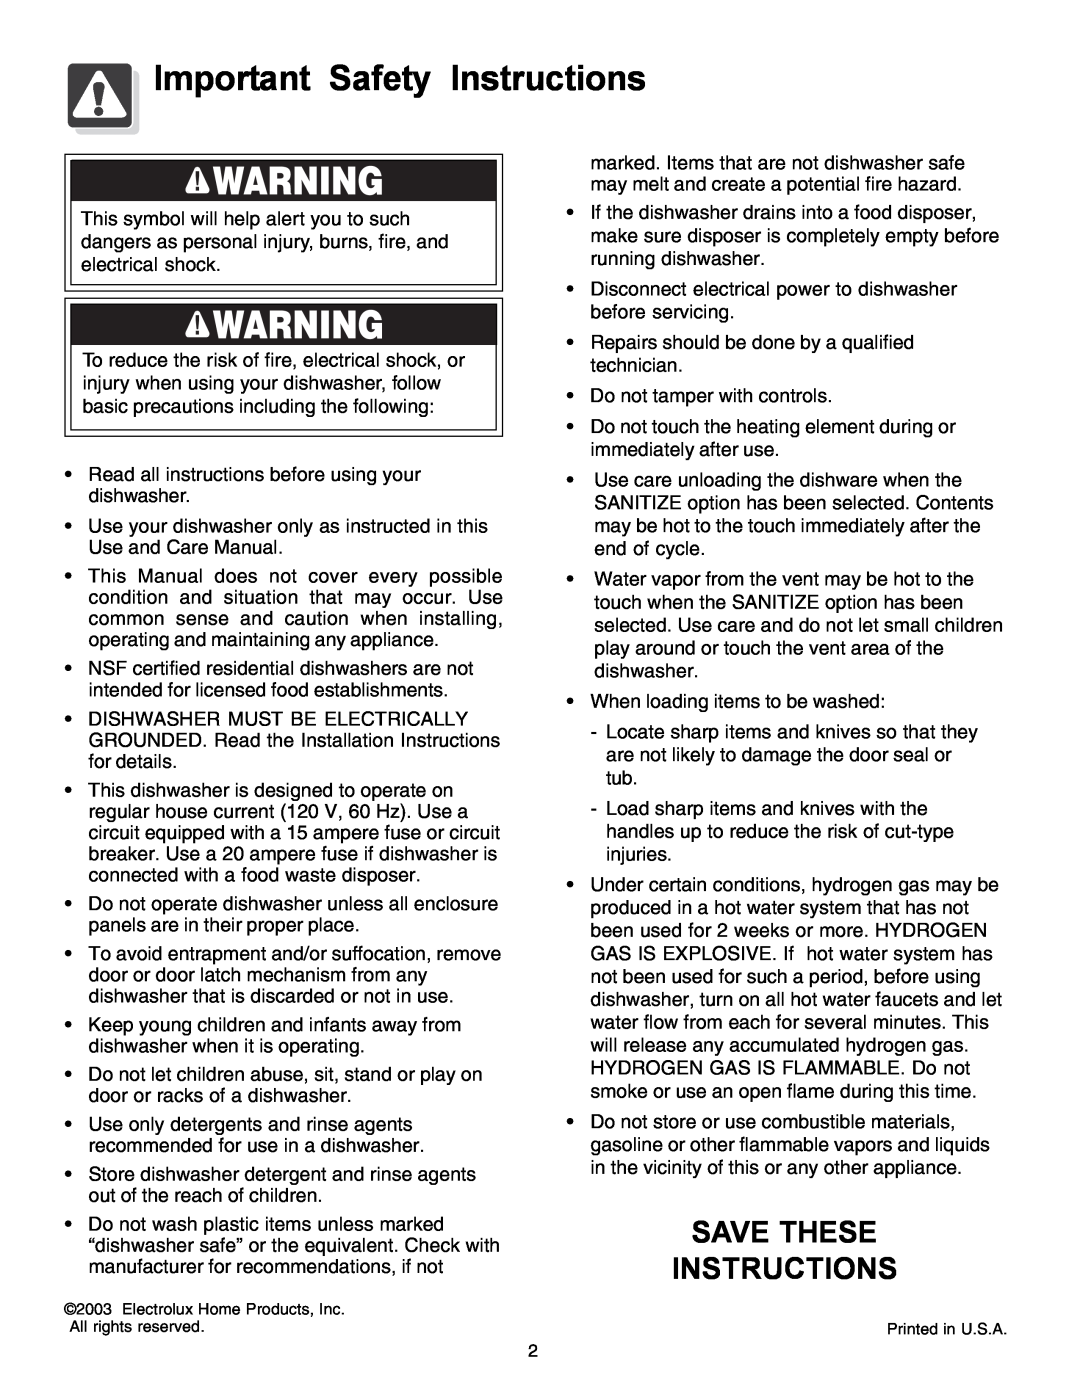 Frigidaire 3000 warranty Important Safety Instructions, Save These Instructions 